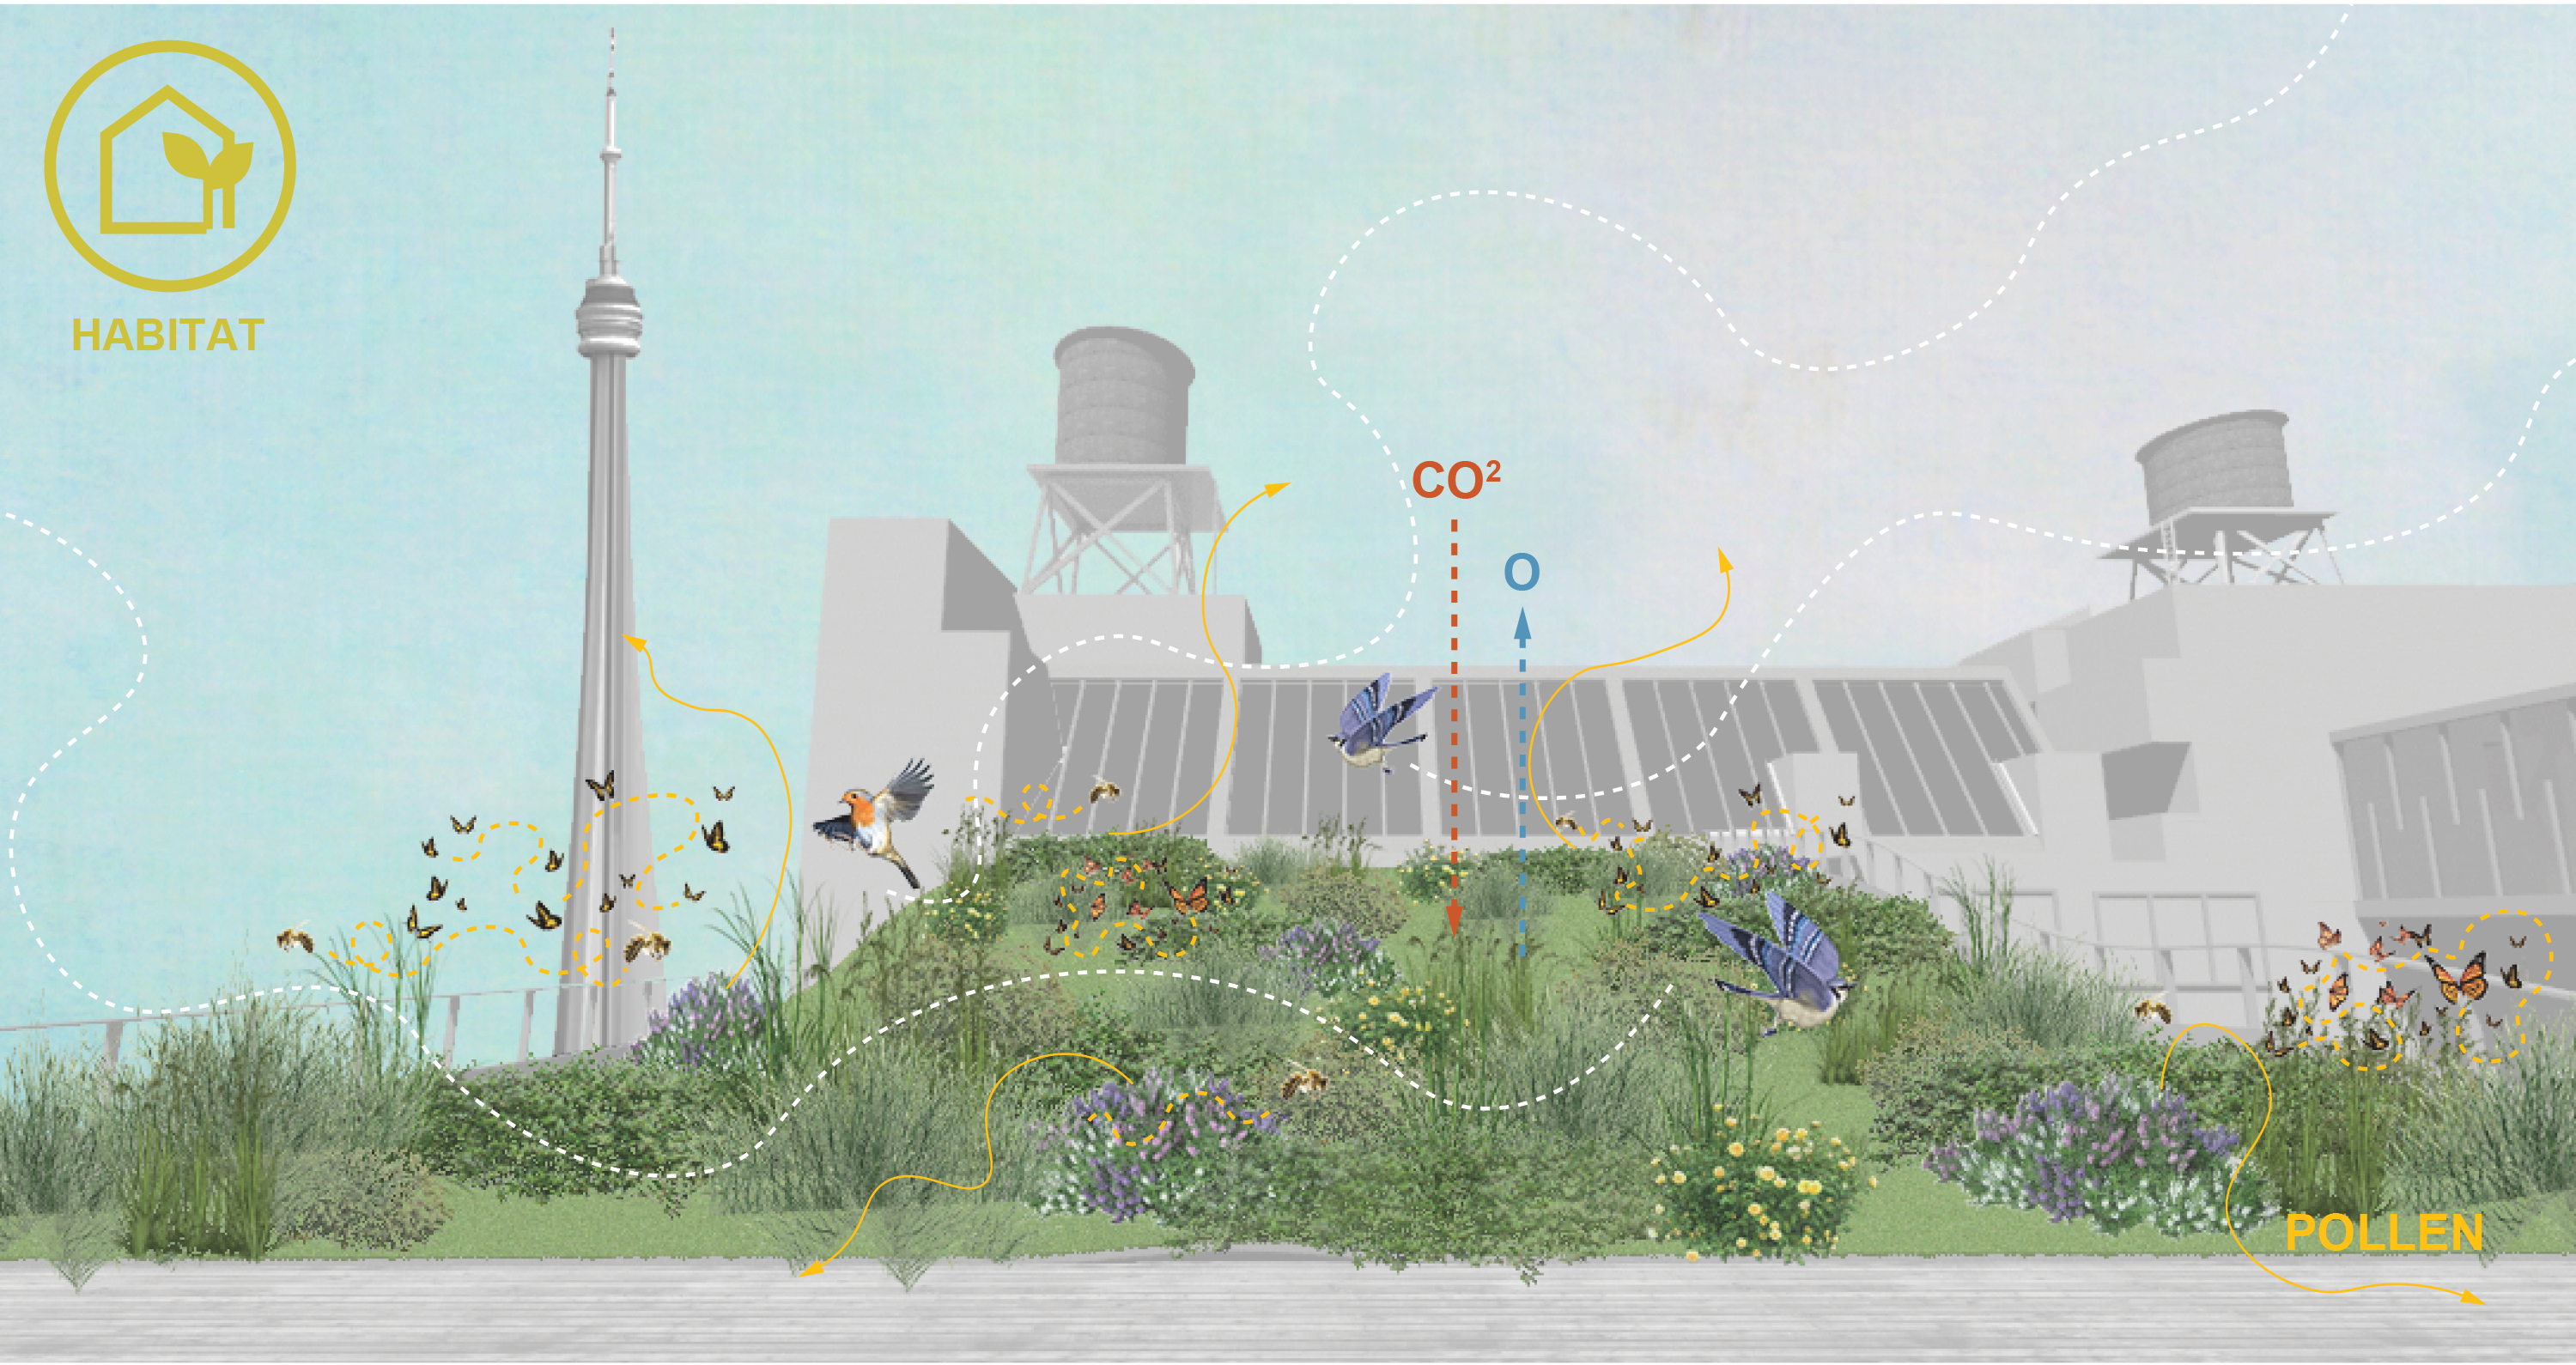 Healthy Cities: Sustainably Adapting the Dominion Foundry Complex